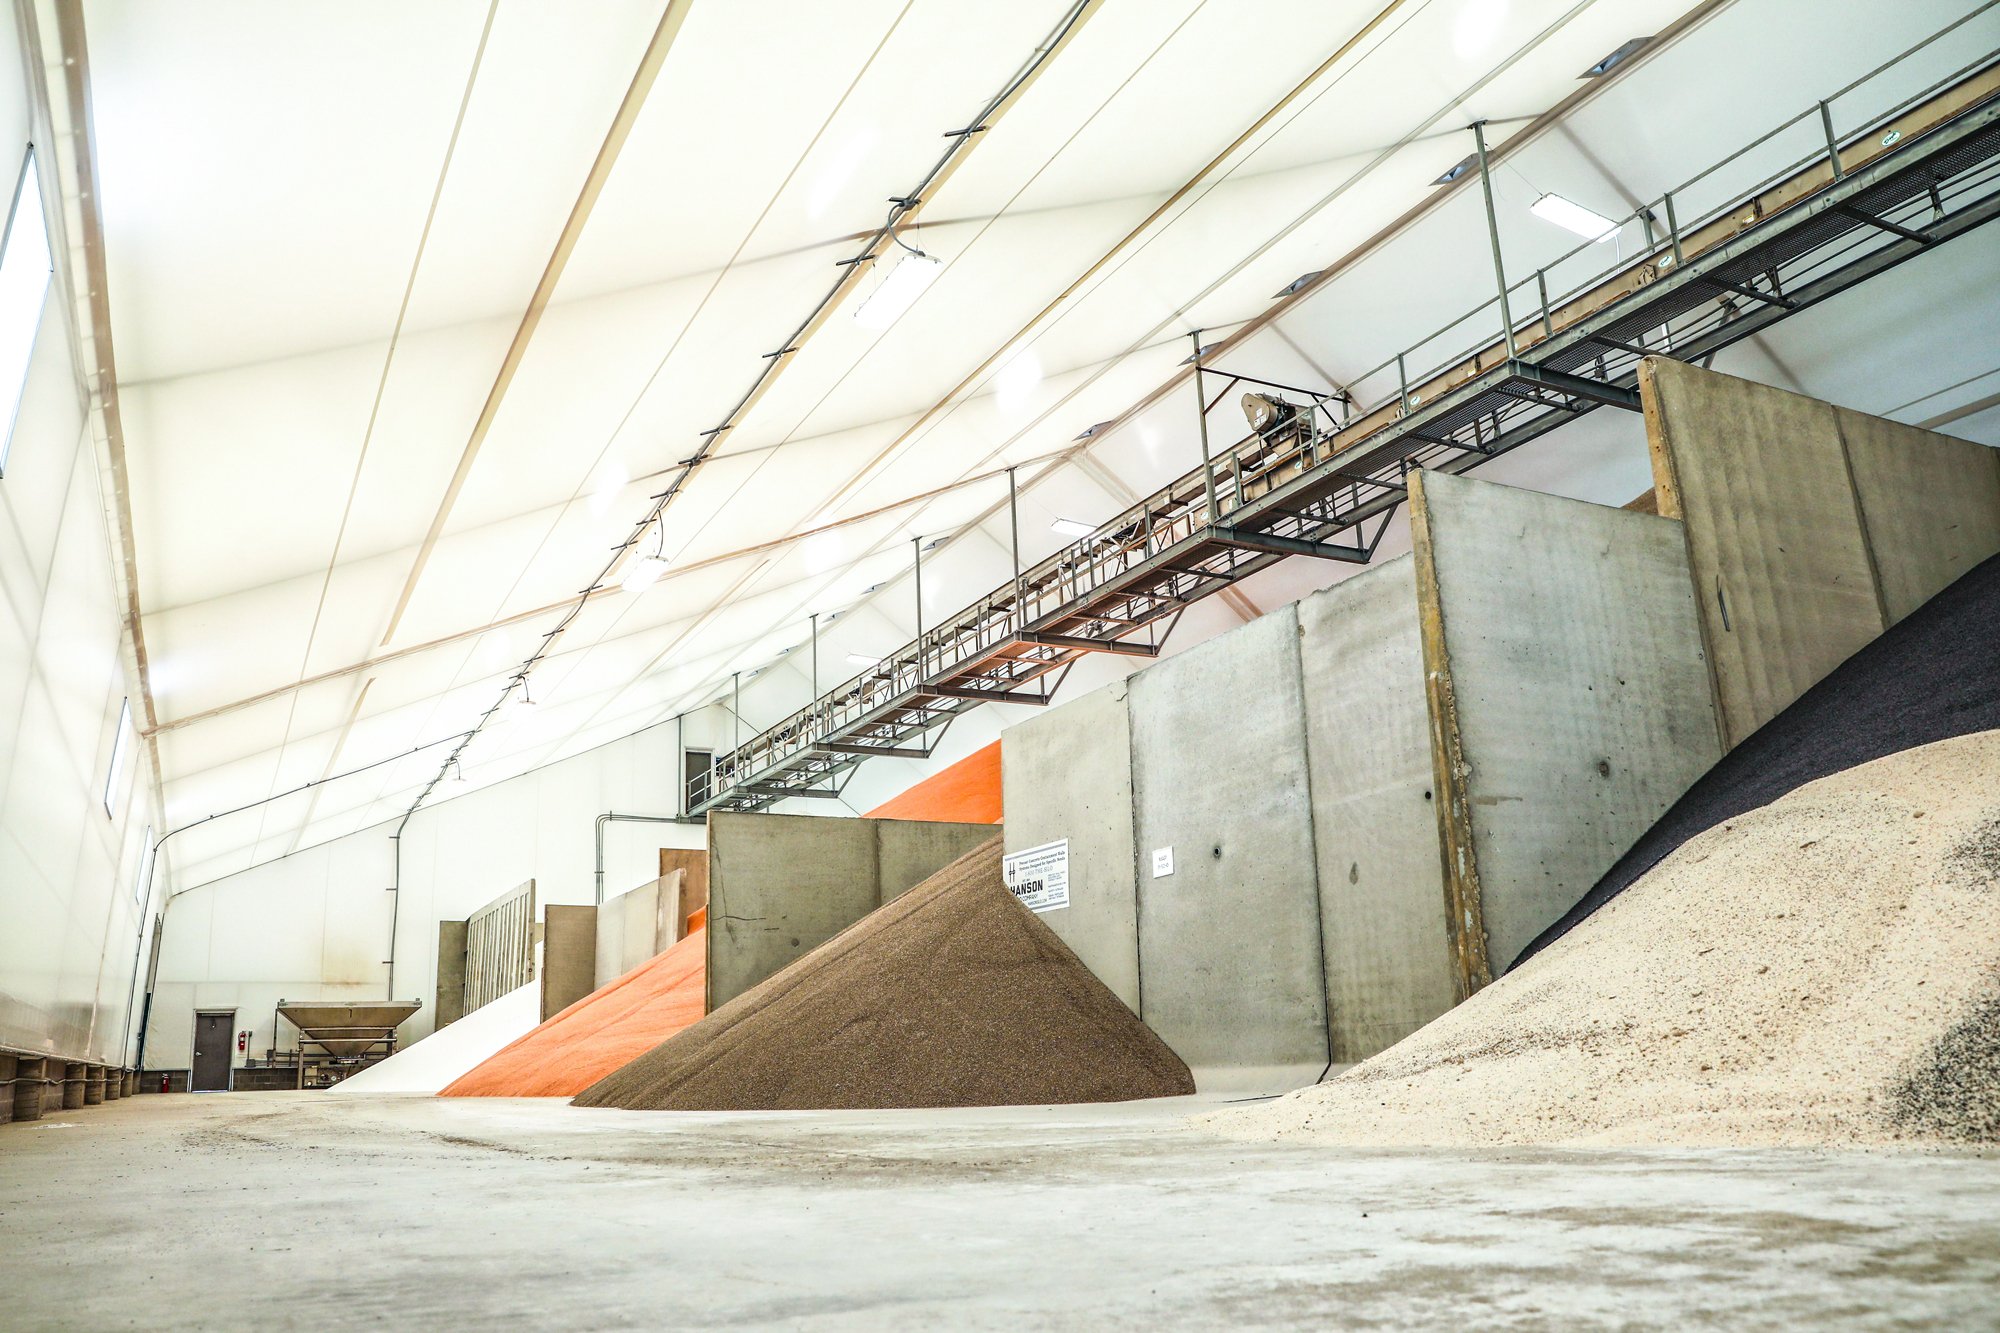 Why Fabric Structures for Fertilizer Storage?